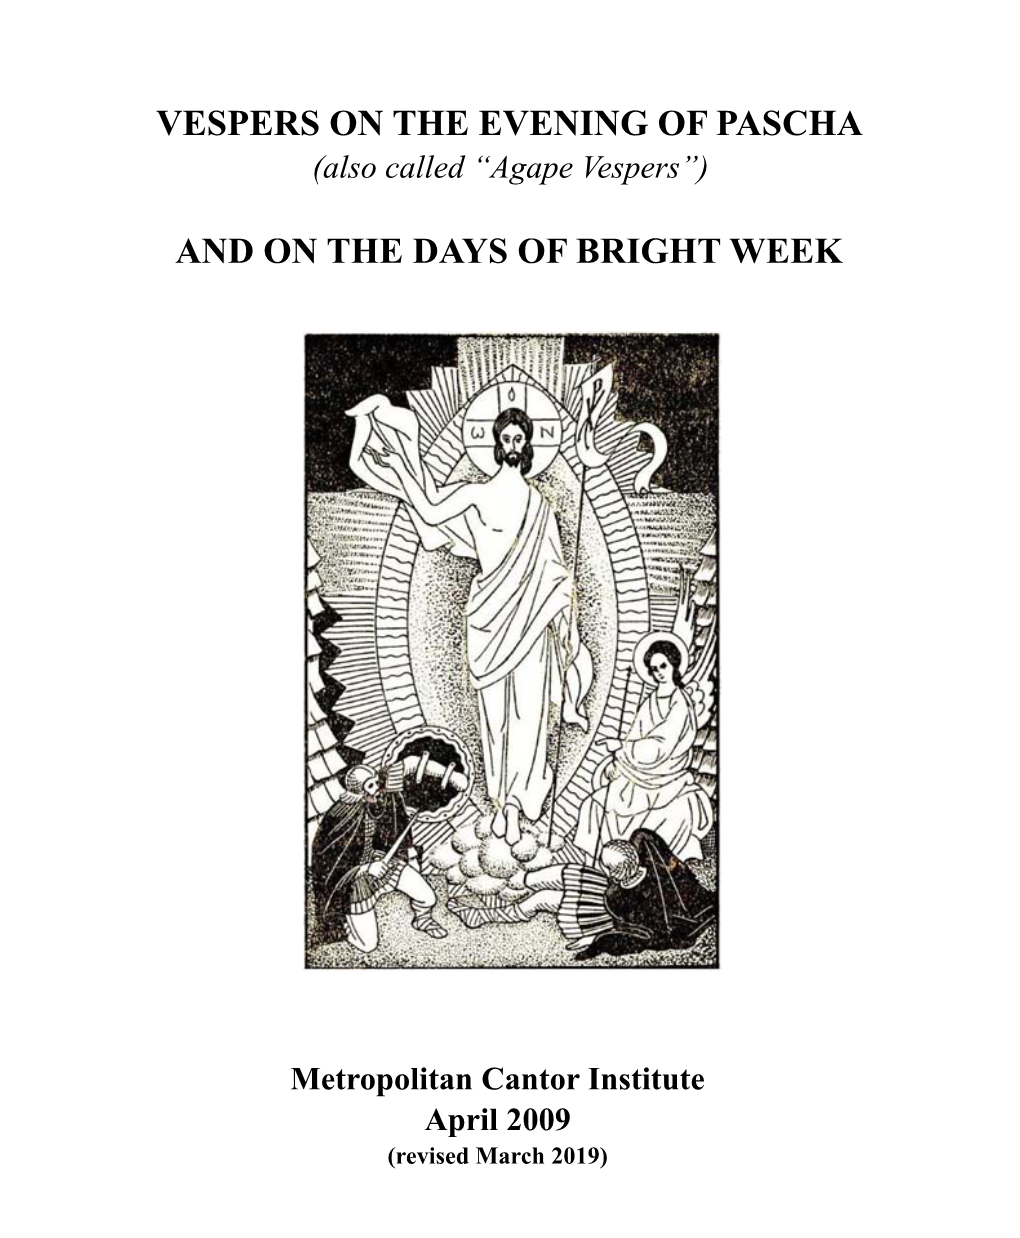 VESPERS on the EVENING of PASCHA (Also Called “Agape Vespers”)